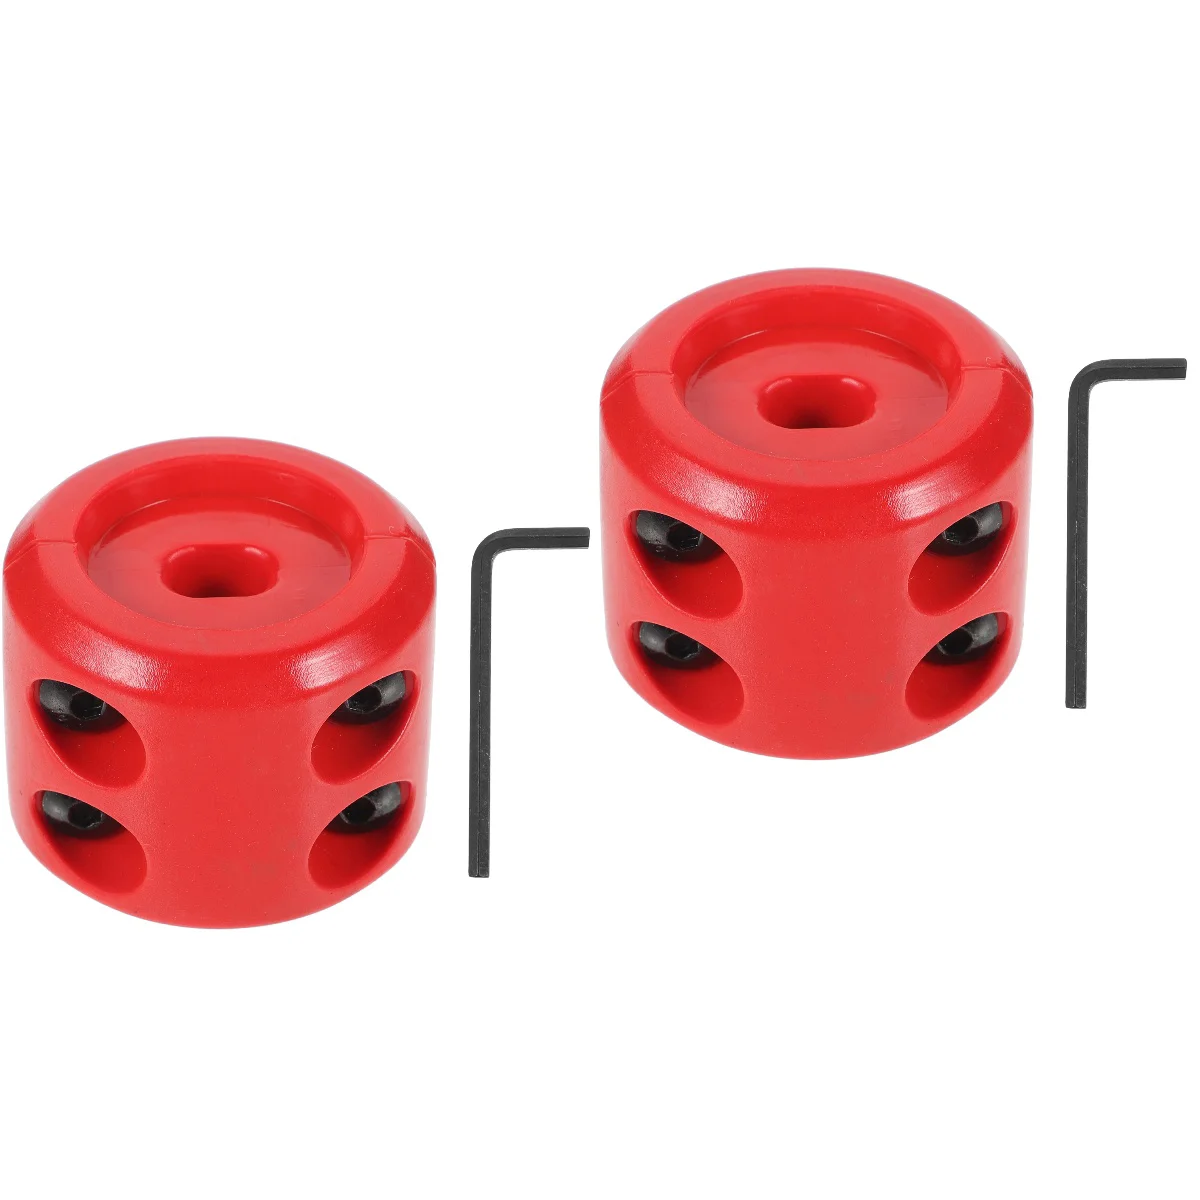 

2 Sets Winch Cable Stopper Prevent Bouncing Stopper with Wrench Compatible for ATV UTV